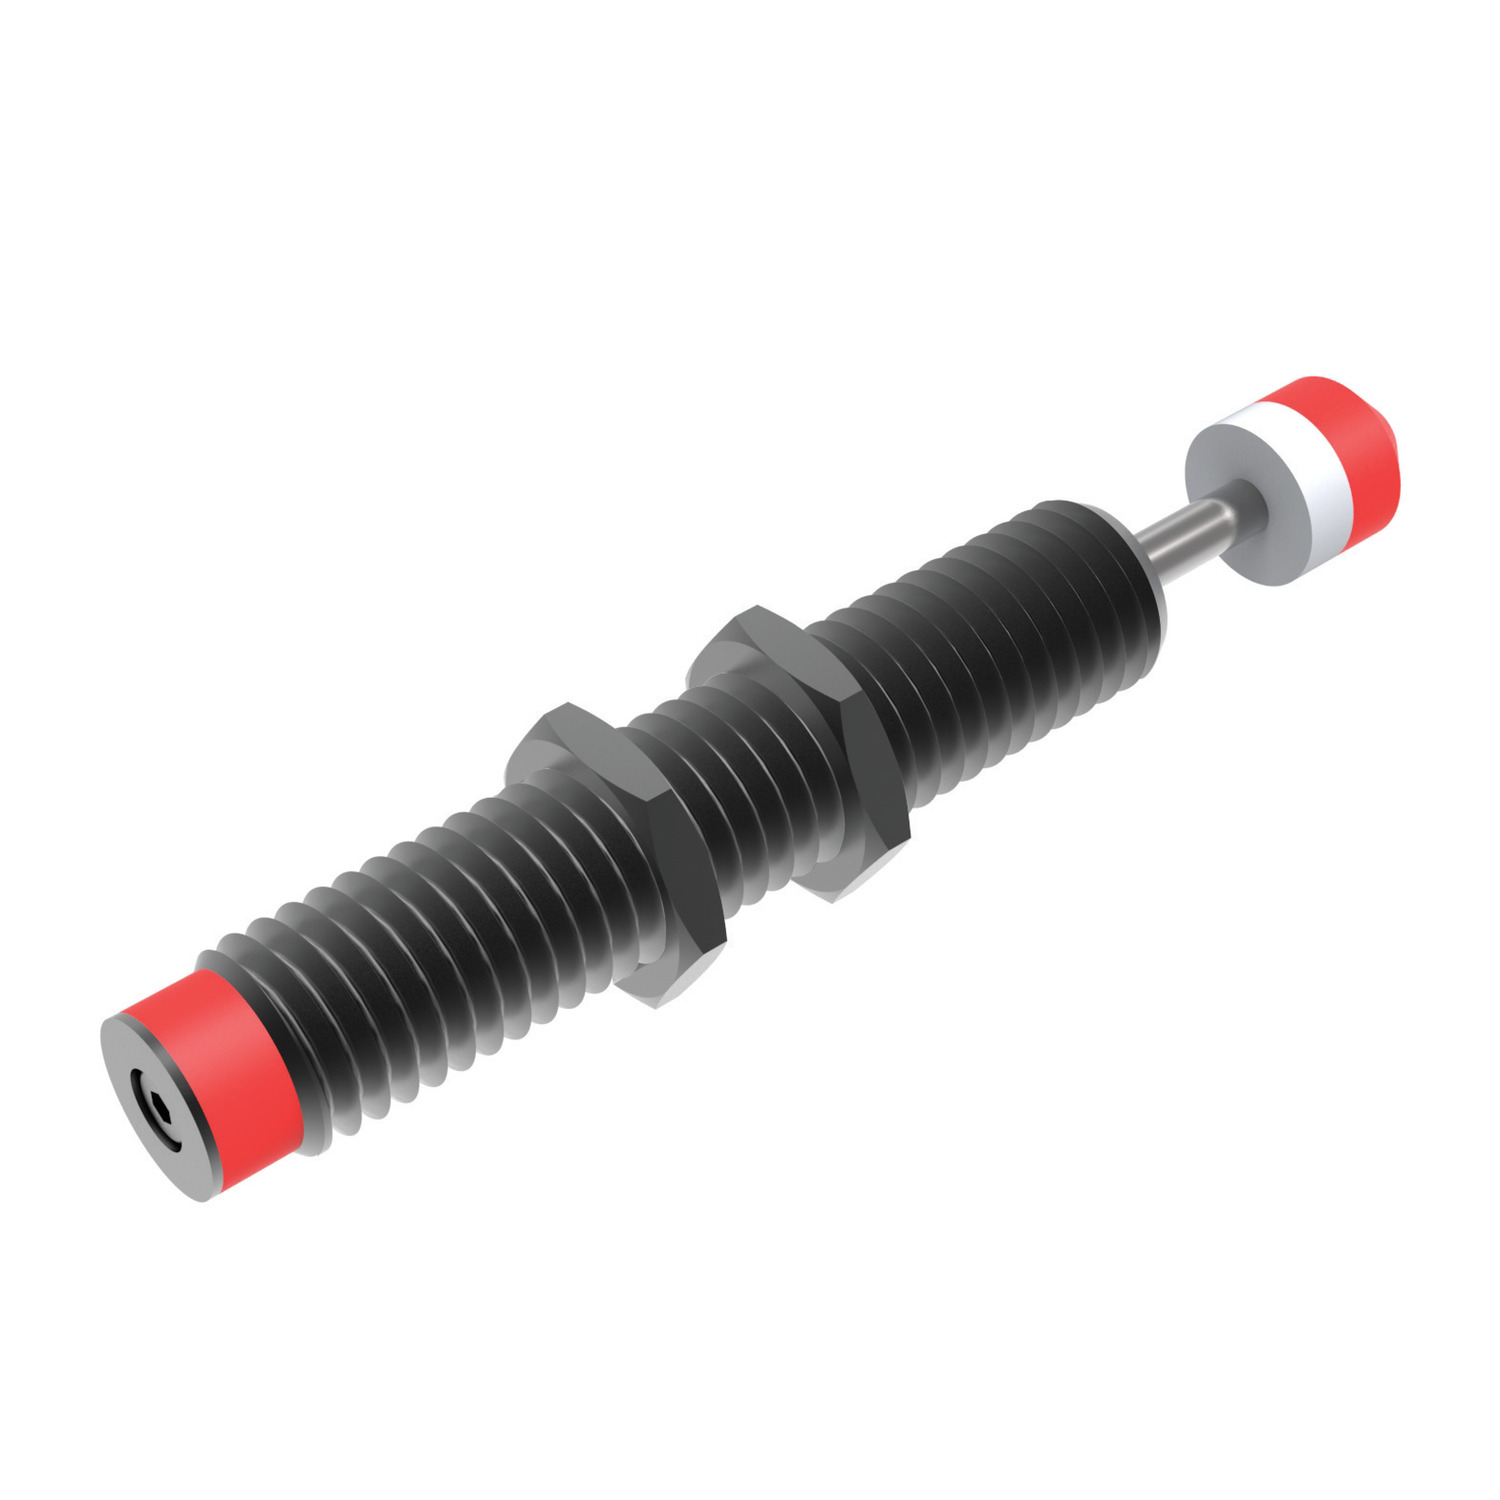 Product 68002, Shock Absorbers, Self Compensating M14 - M20, non adjustable / 